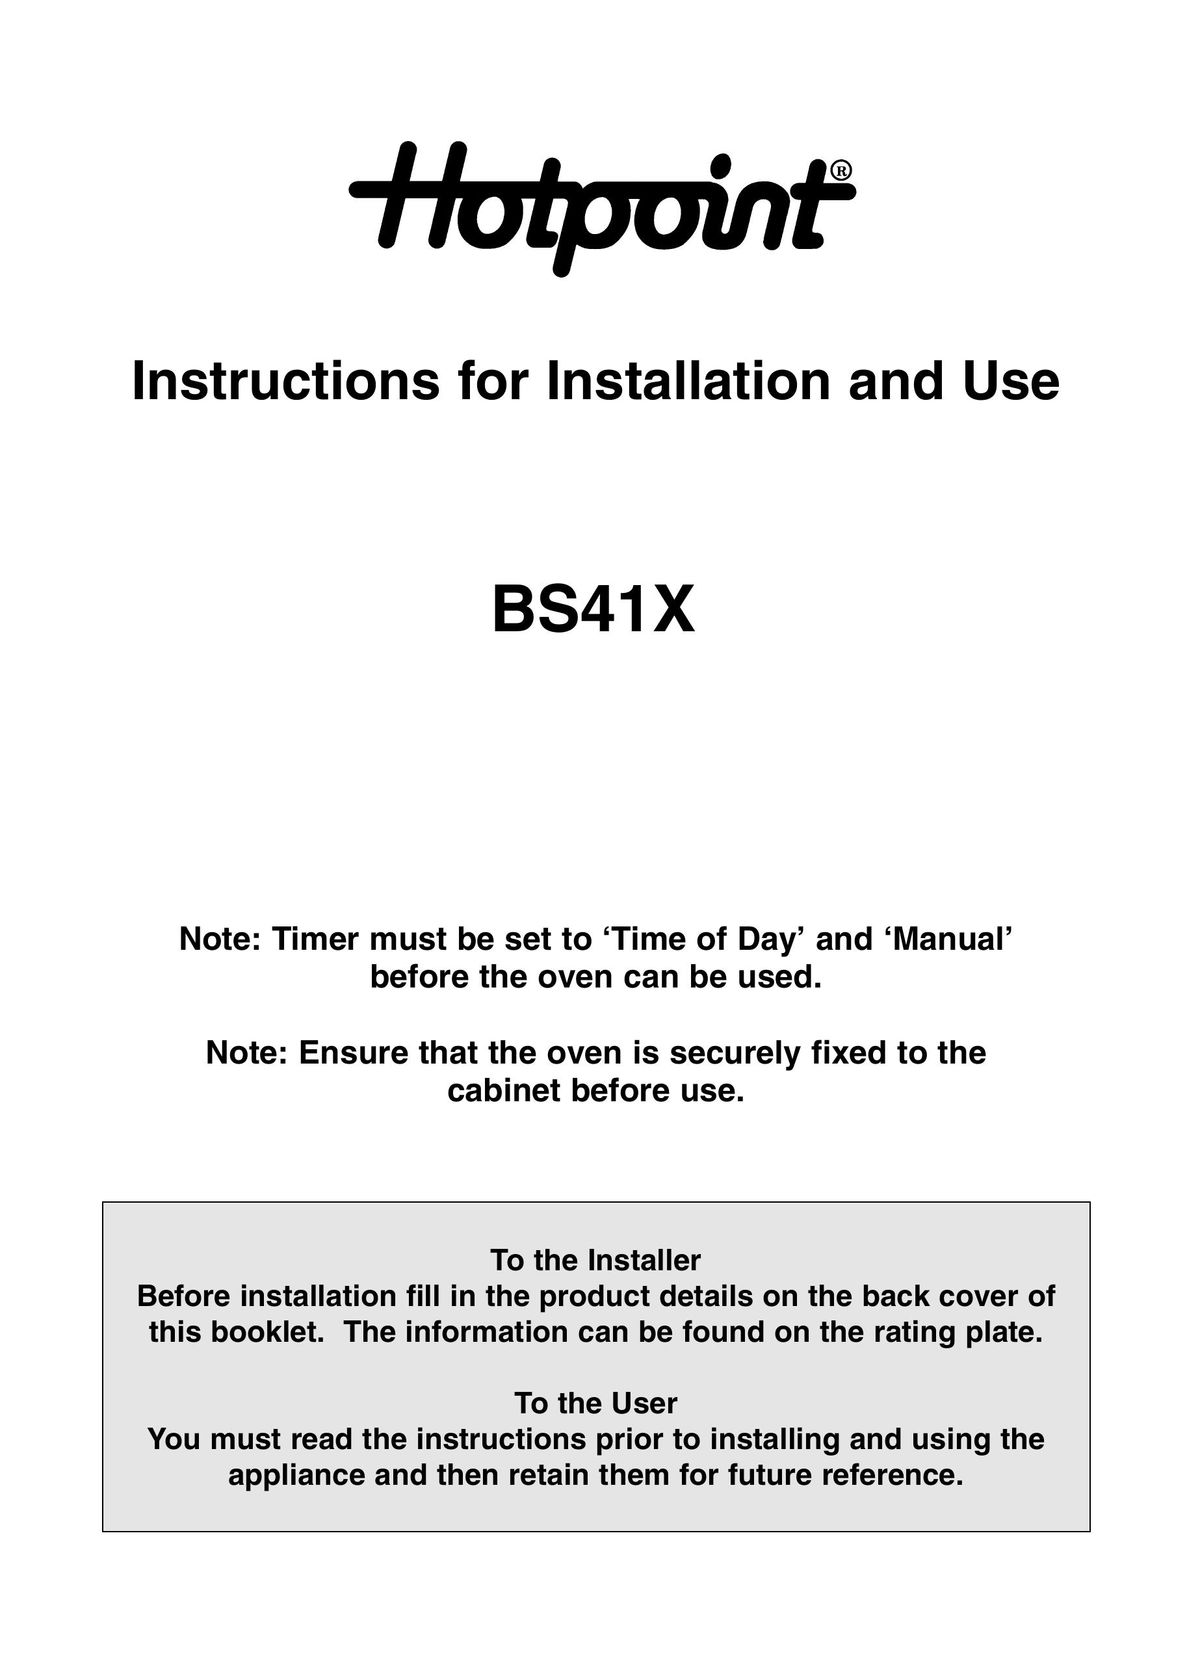 Hotpoint BS41X Oven User Manual